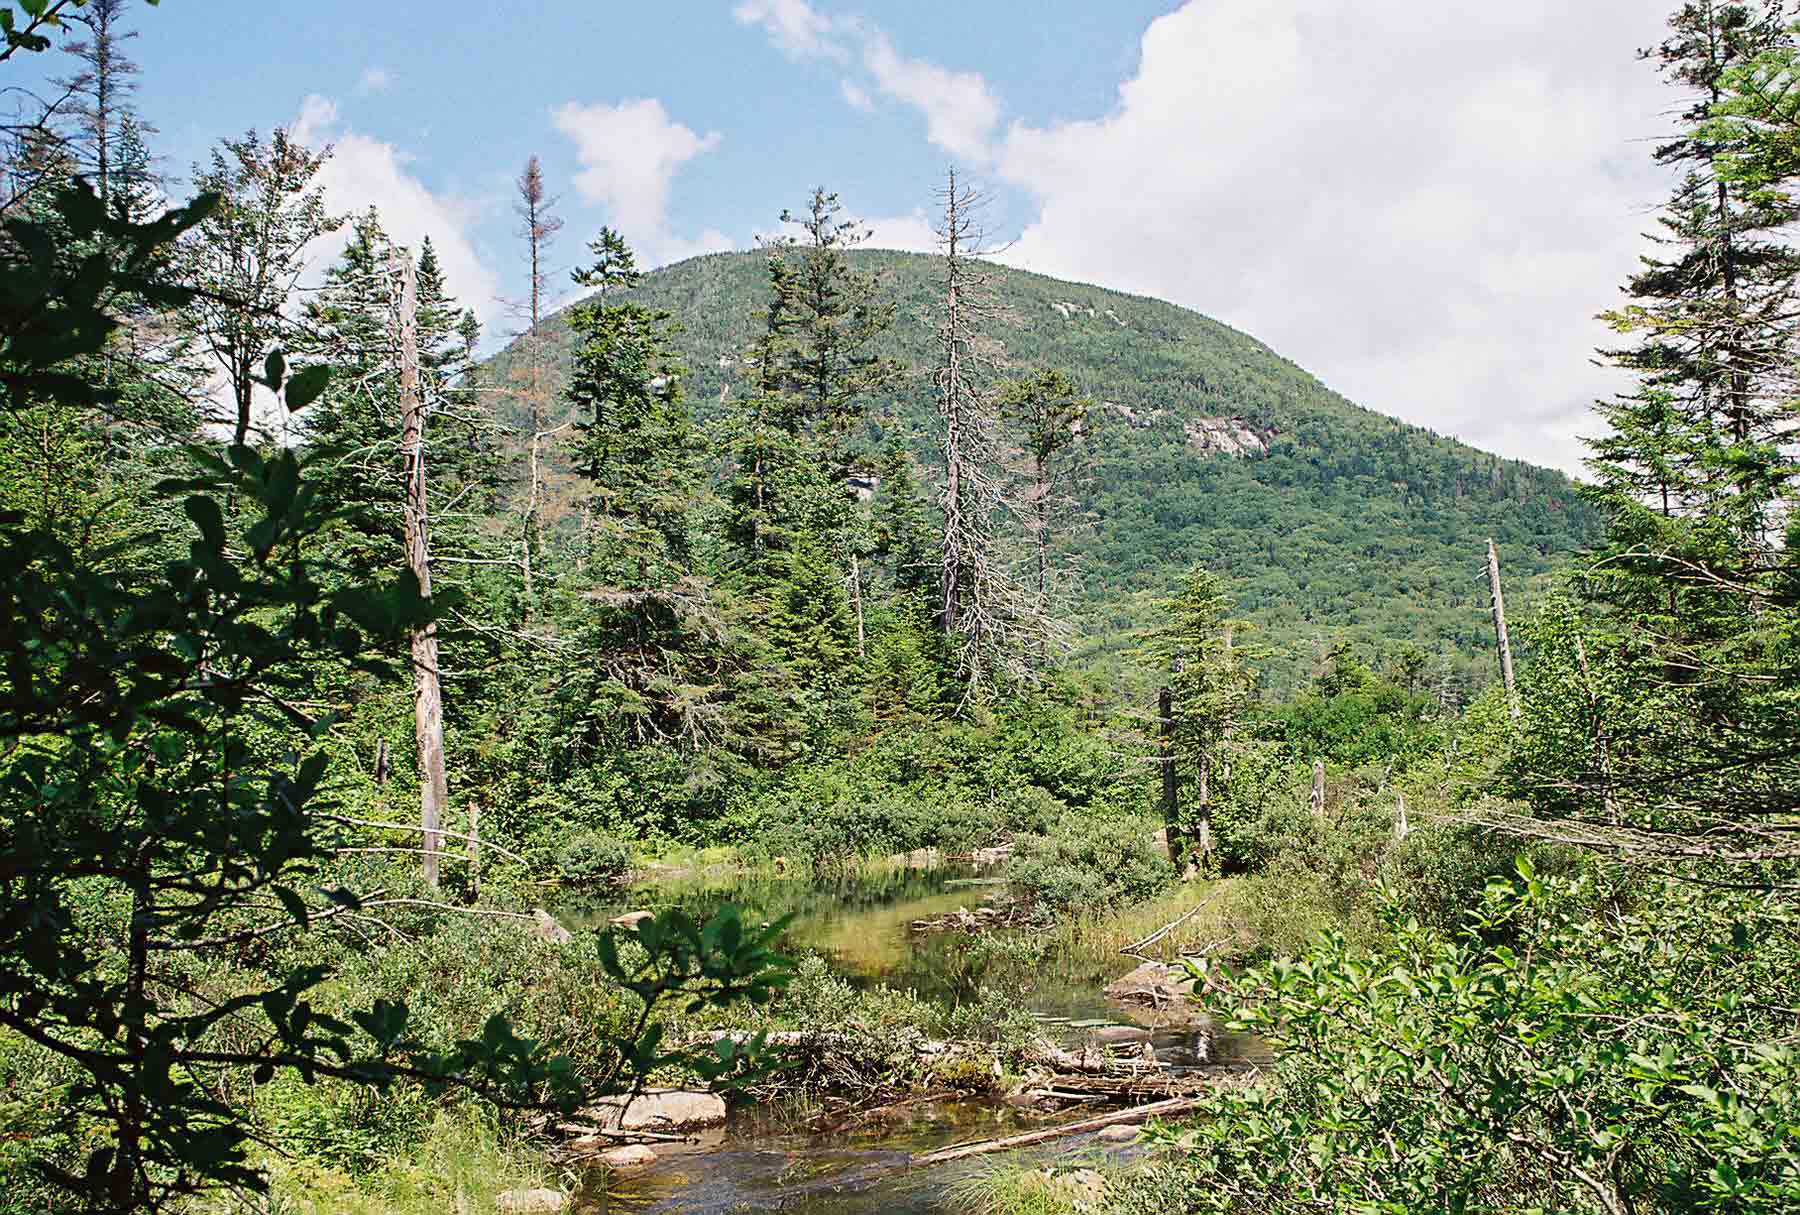 Picture taken towards the north end of the Cascade Brook Trail (AT) in July '04. Mountain ahead is Cannon Mountain. Taken at approx. Mile 2.7.  Courtesy dlcul@conncoll.edu